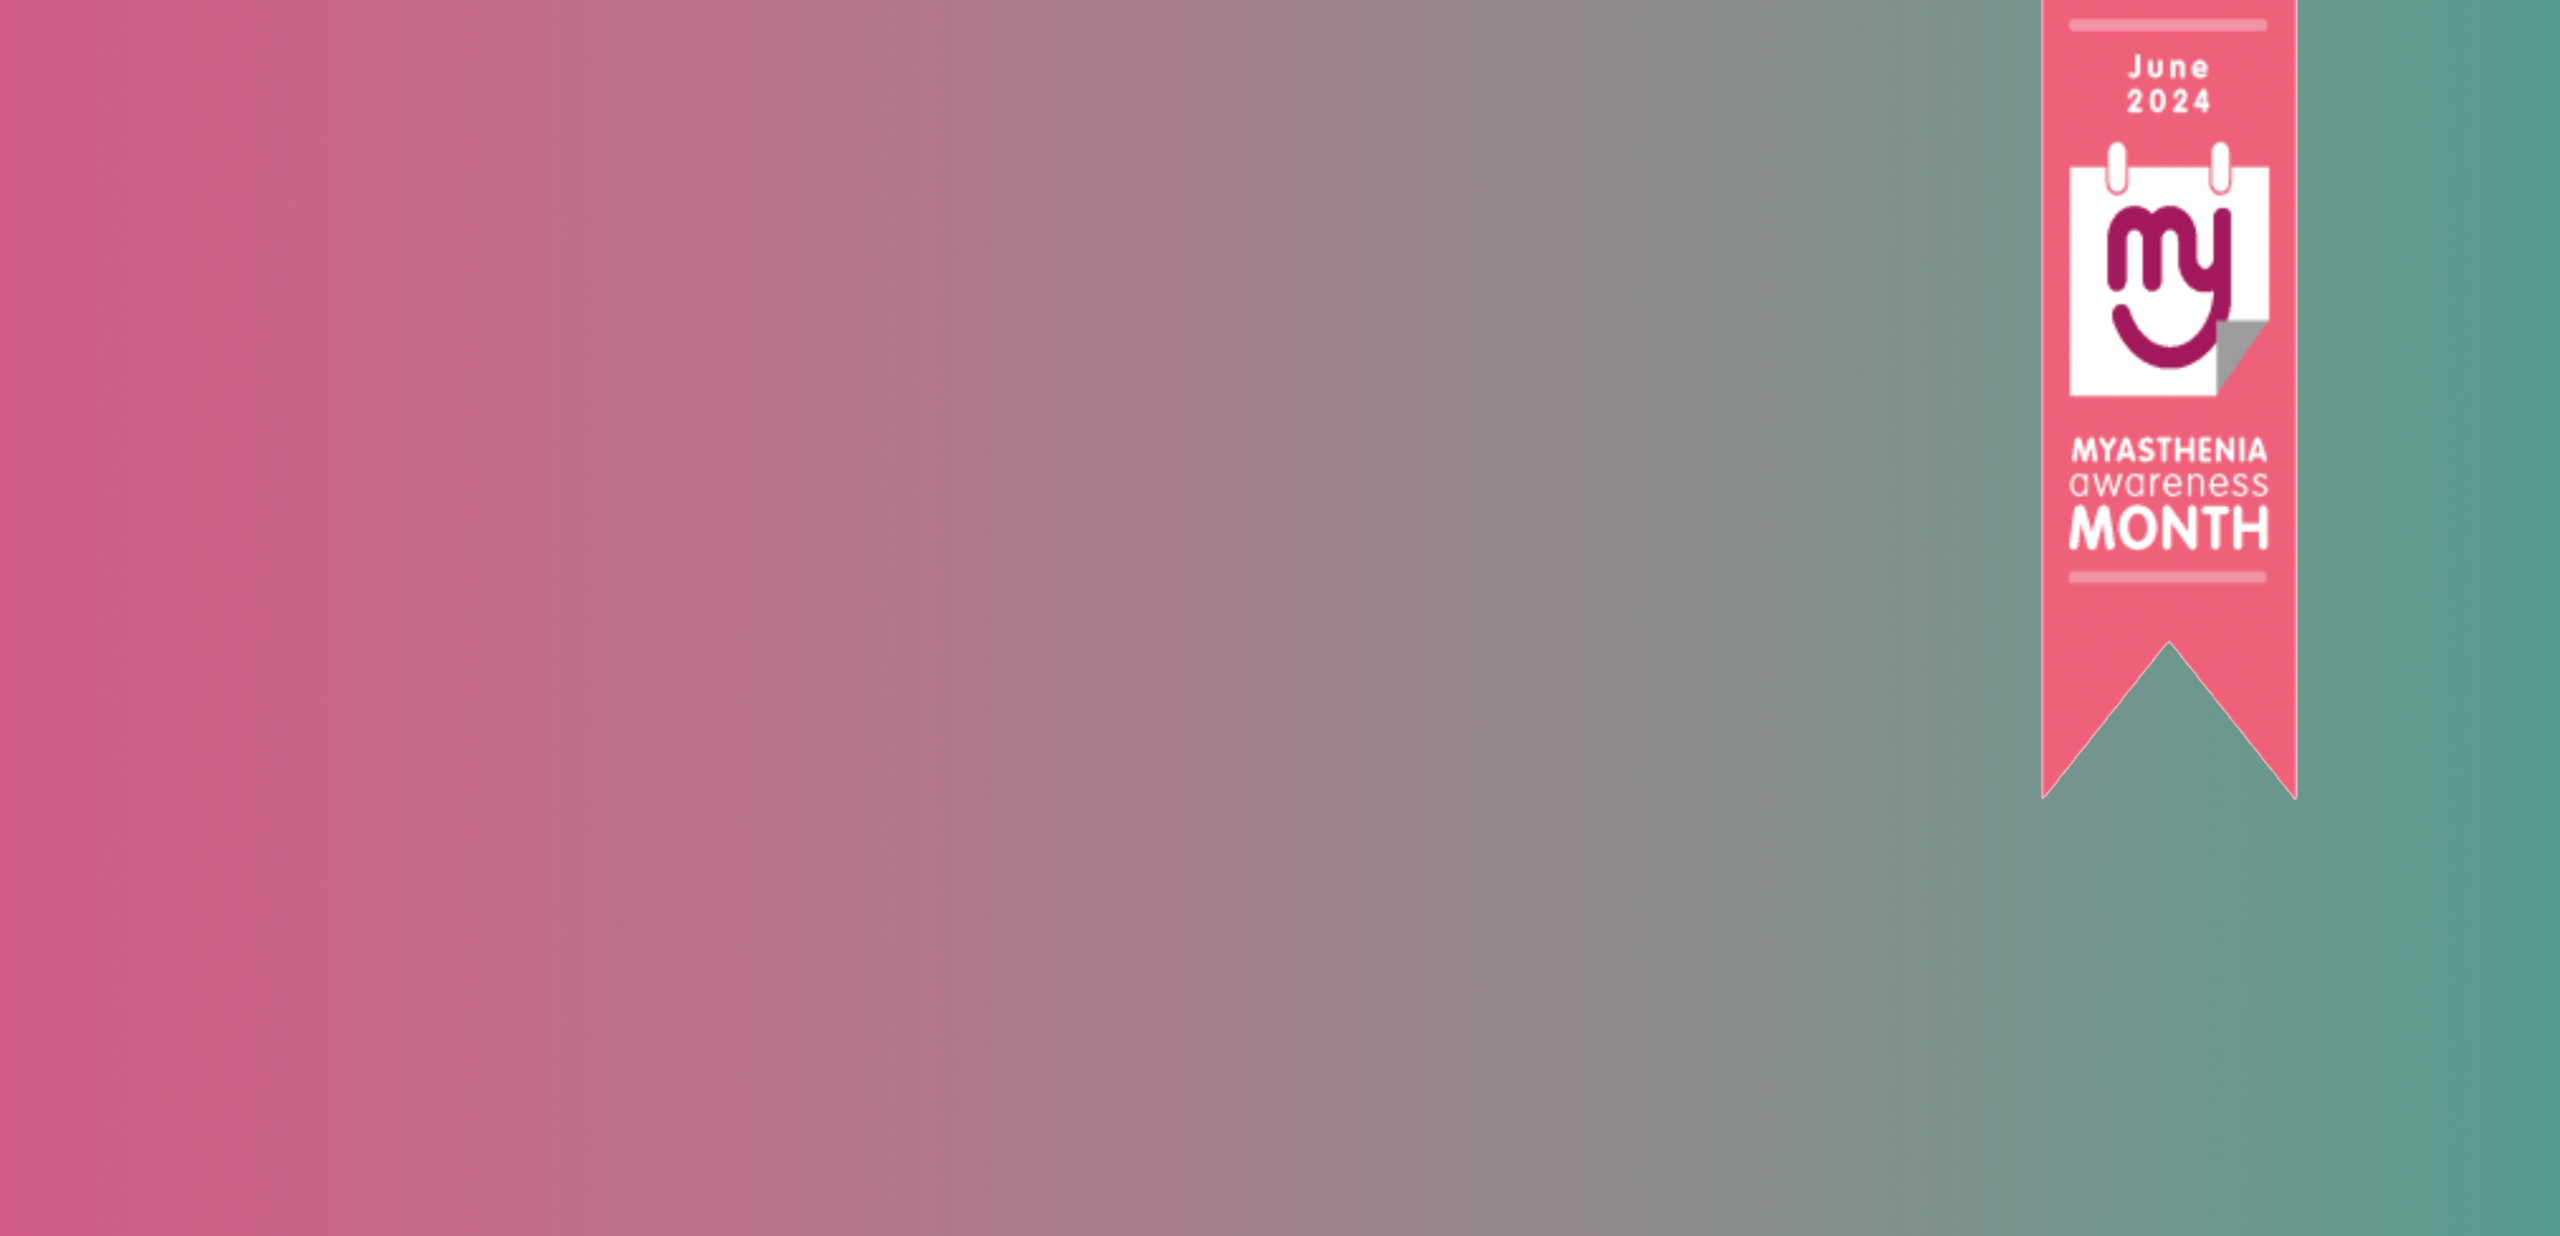 A gradient of colour between pink and a turquoise green. To the right a myasthenia awareness month logo ribbon comes in from the top